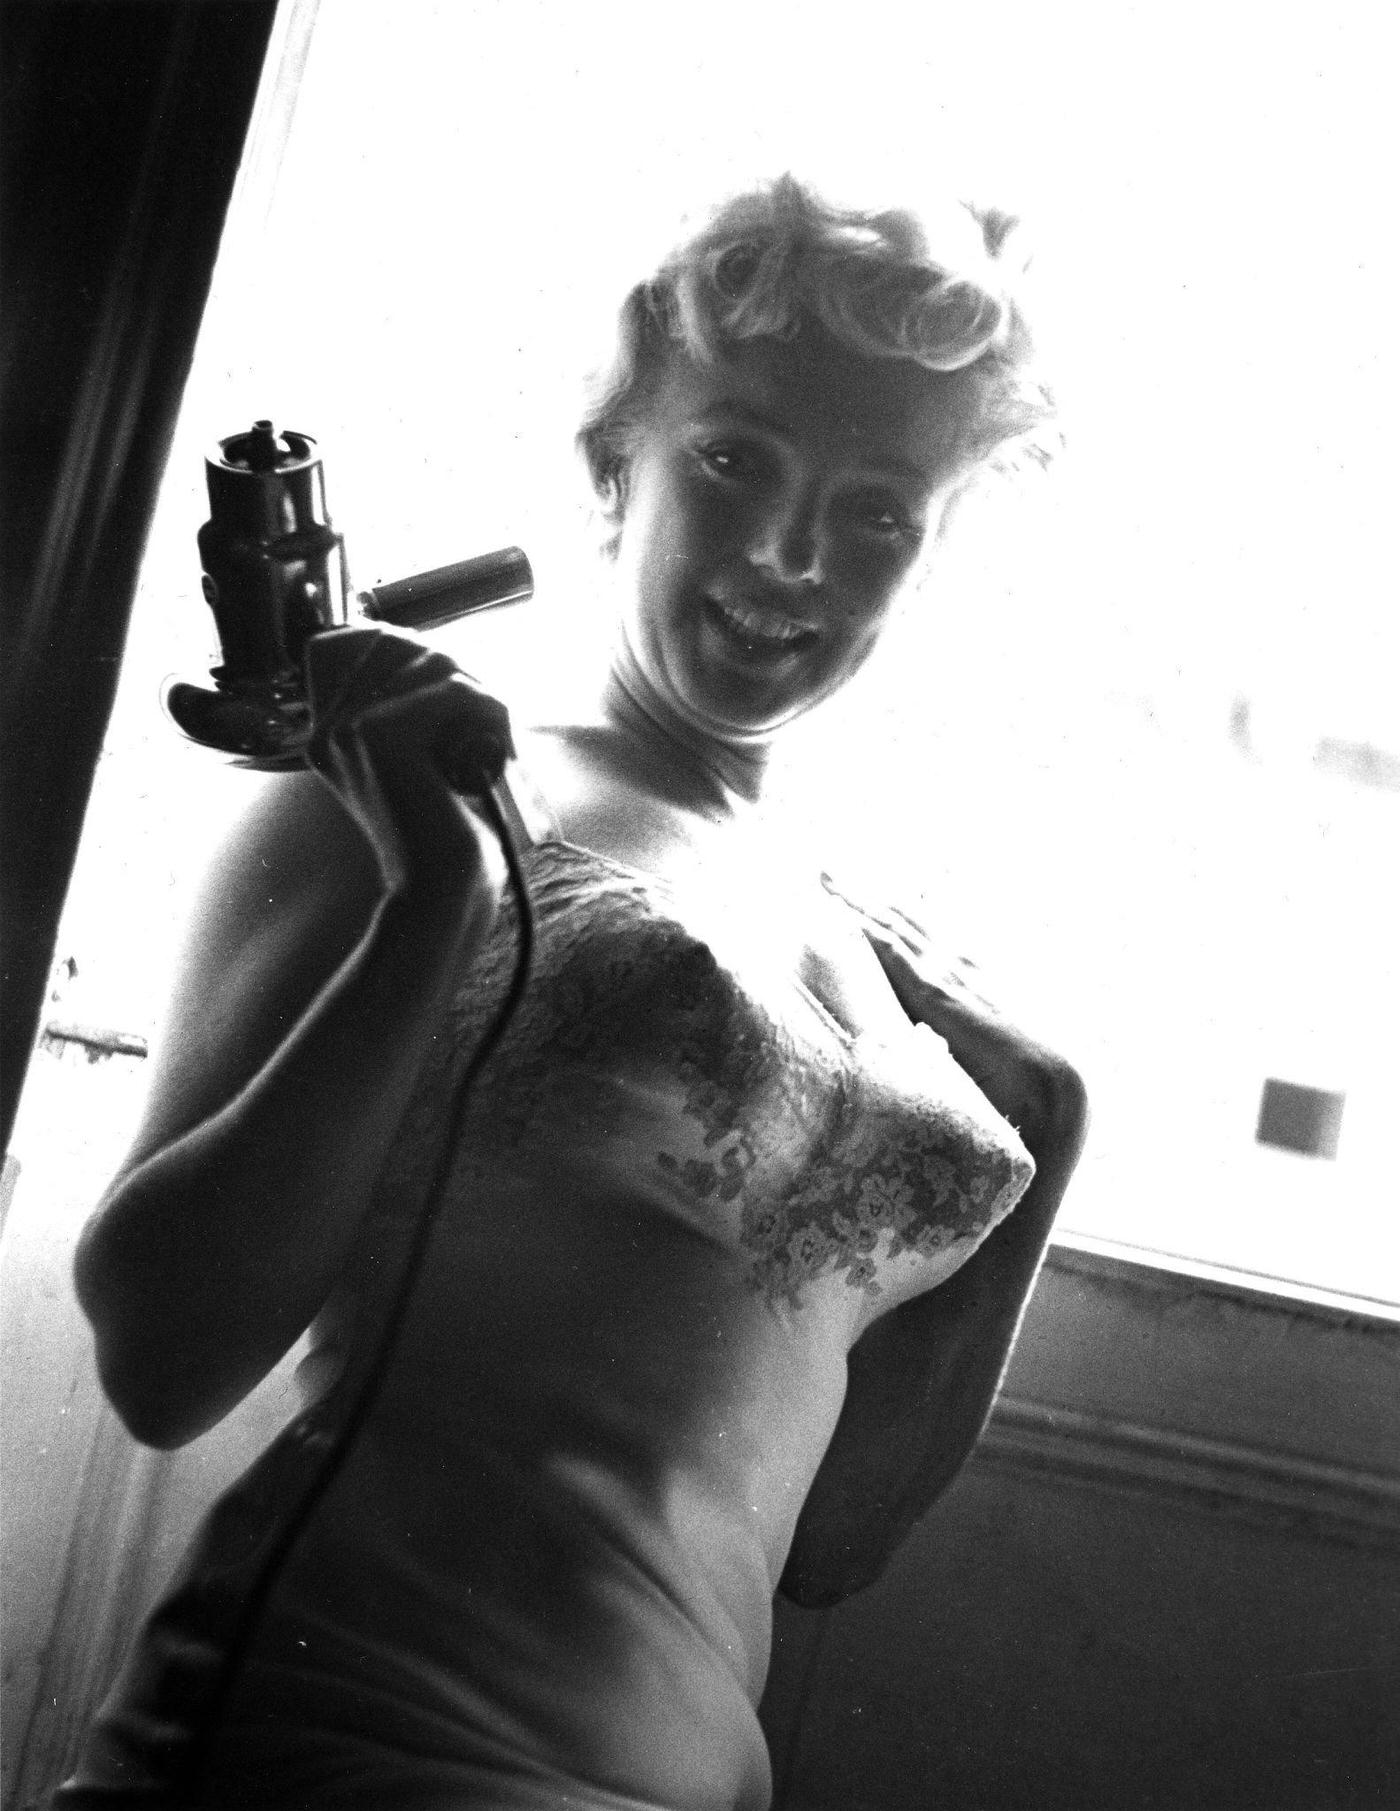 Marilyn Monroe kneels by an open window holding a hair dryer in 1954 during the filming of "The Seven Year Itch" in New York